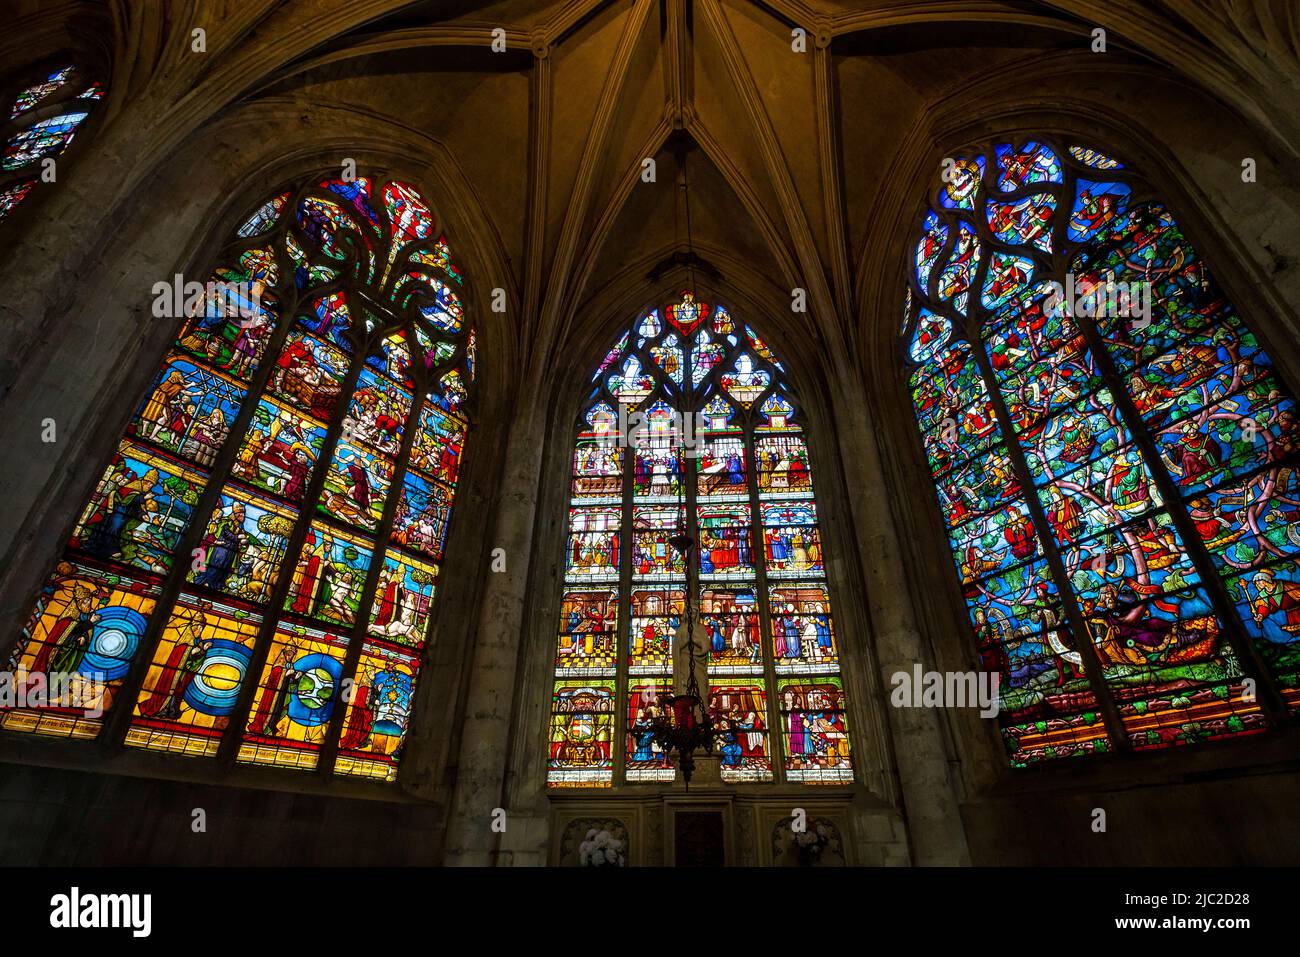 Stained glass windows of Troyes church of Sainte-Madeleine, built in the 12th century. Aube, Champagne-Ardenne, France. Jube from 16th century by Jean Stock Photo